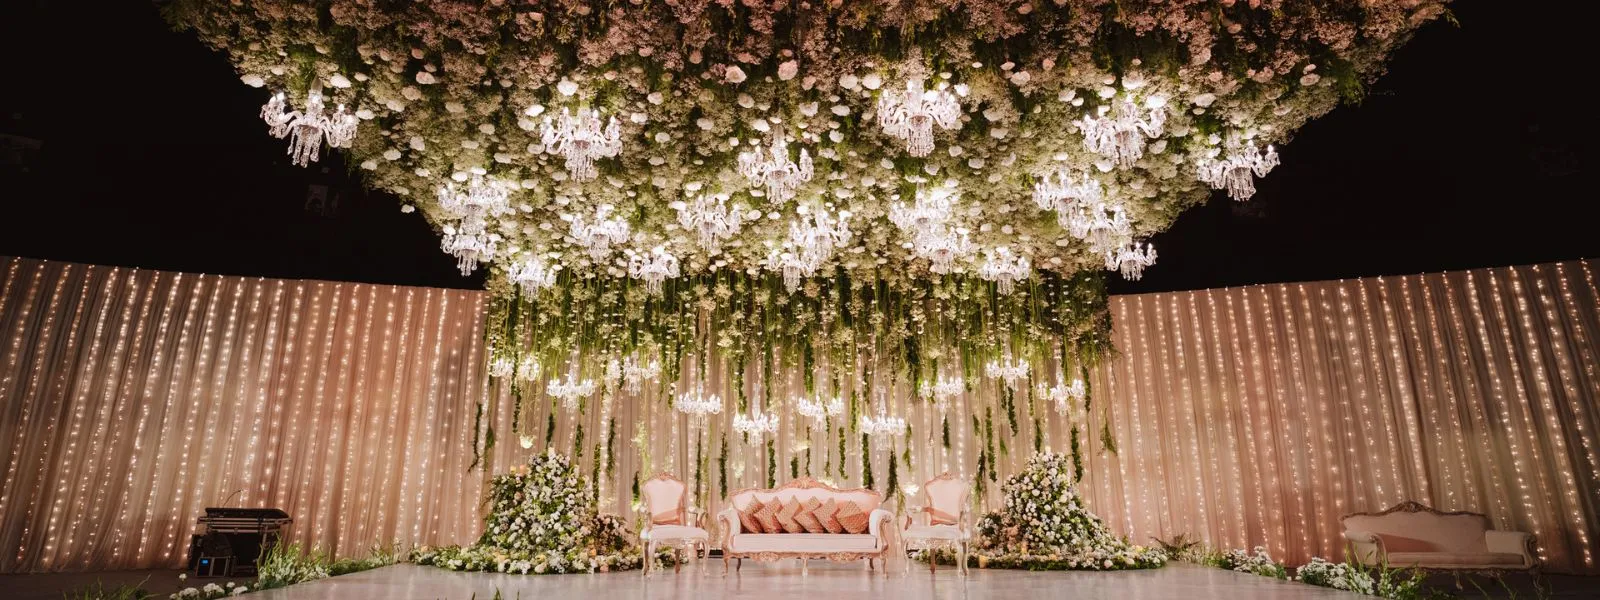 Drapped in Flowers and lights